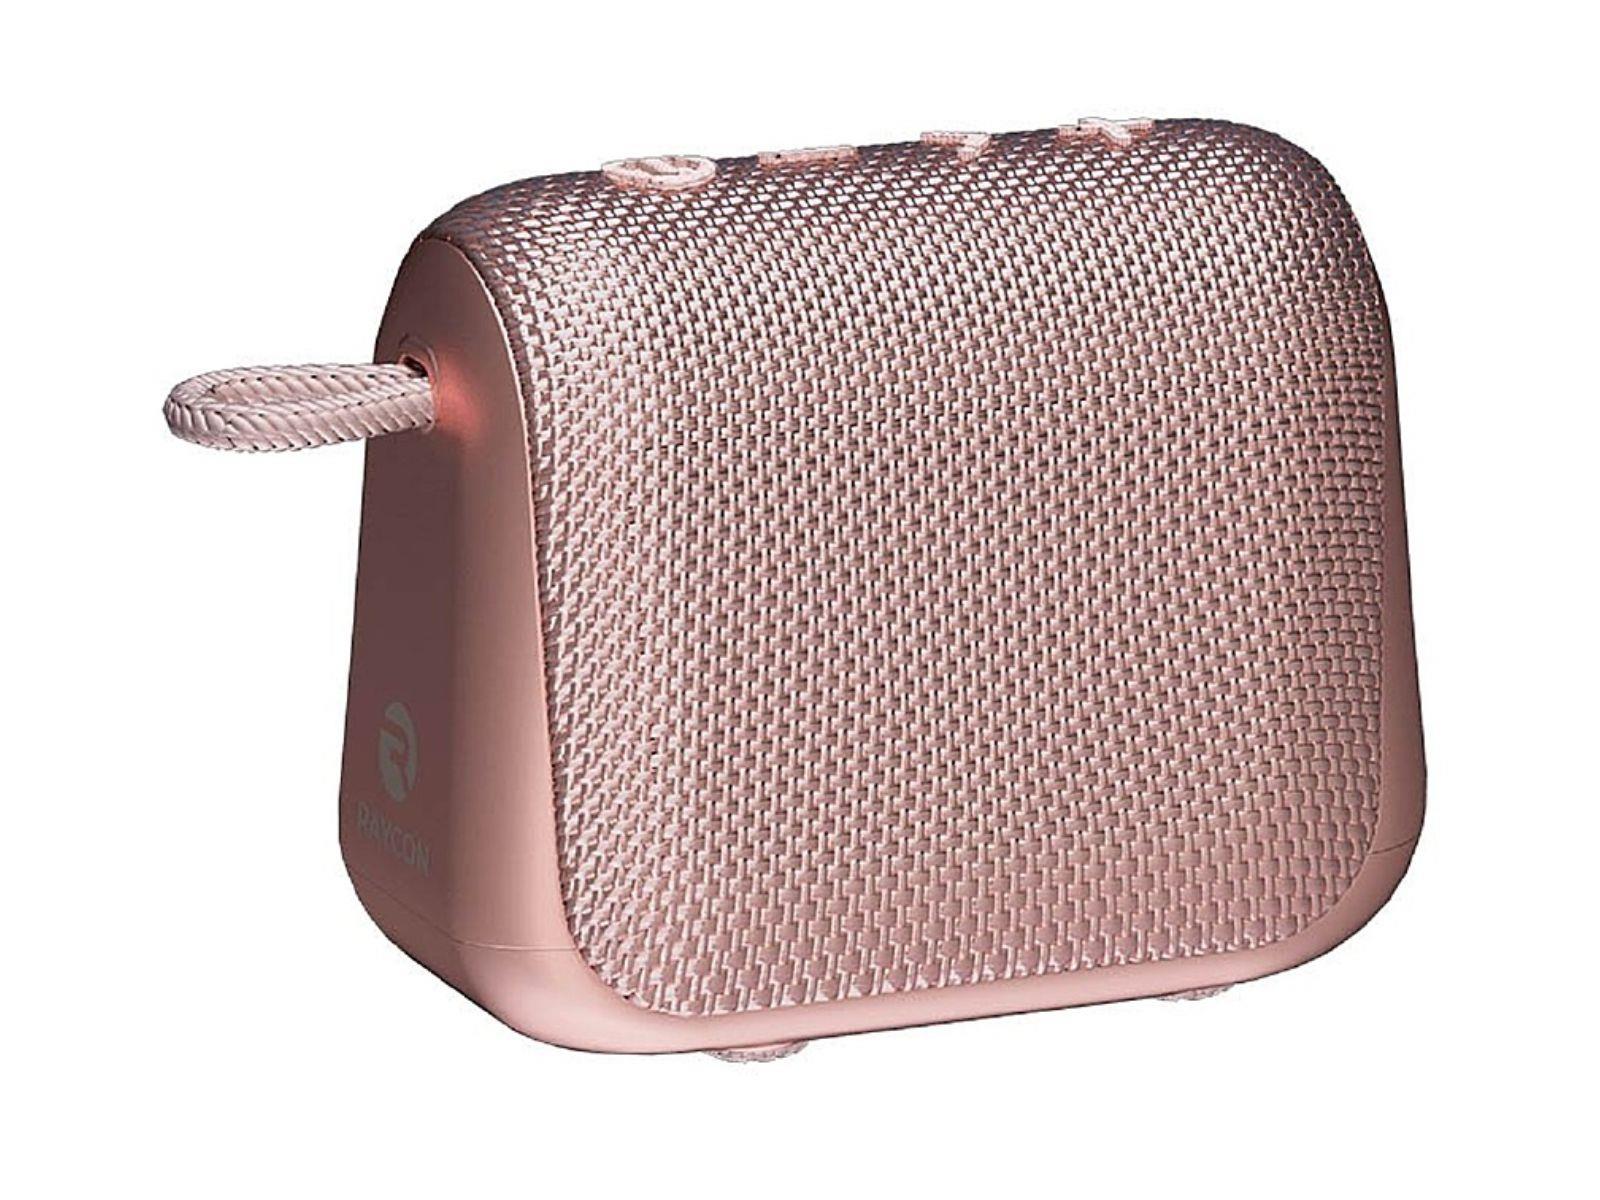 Image shows a front view of the rosegold Raycon Everyday Bluetooth Speaker